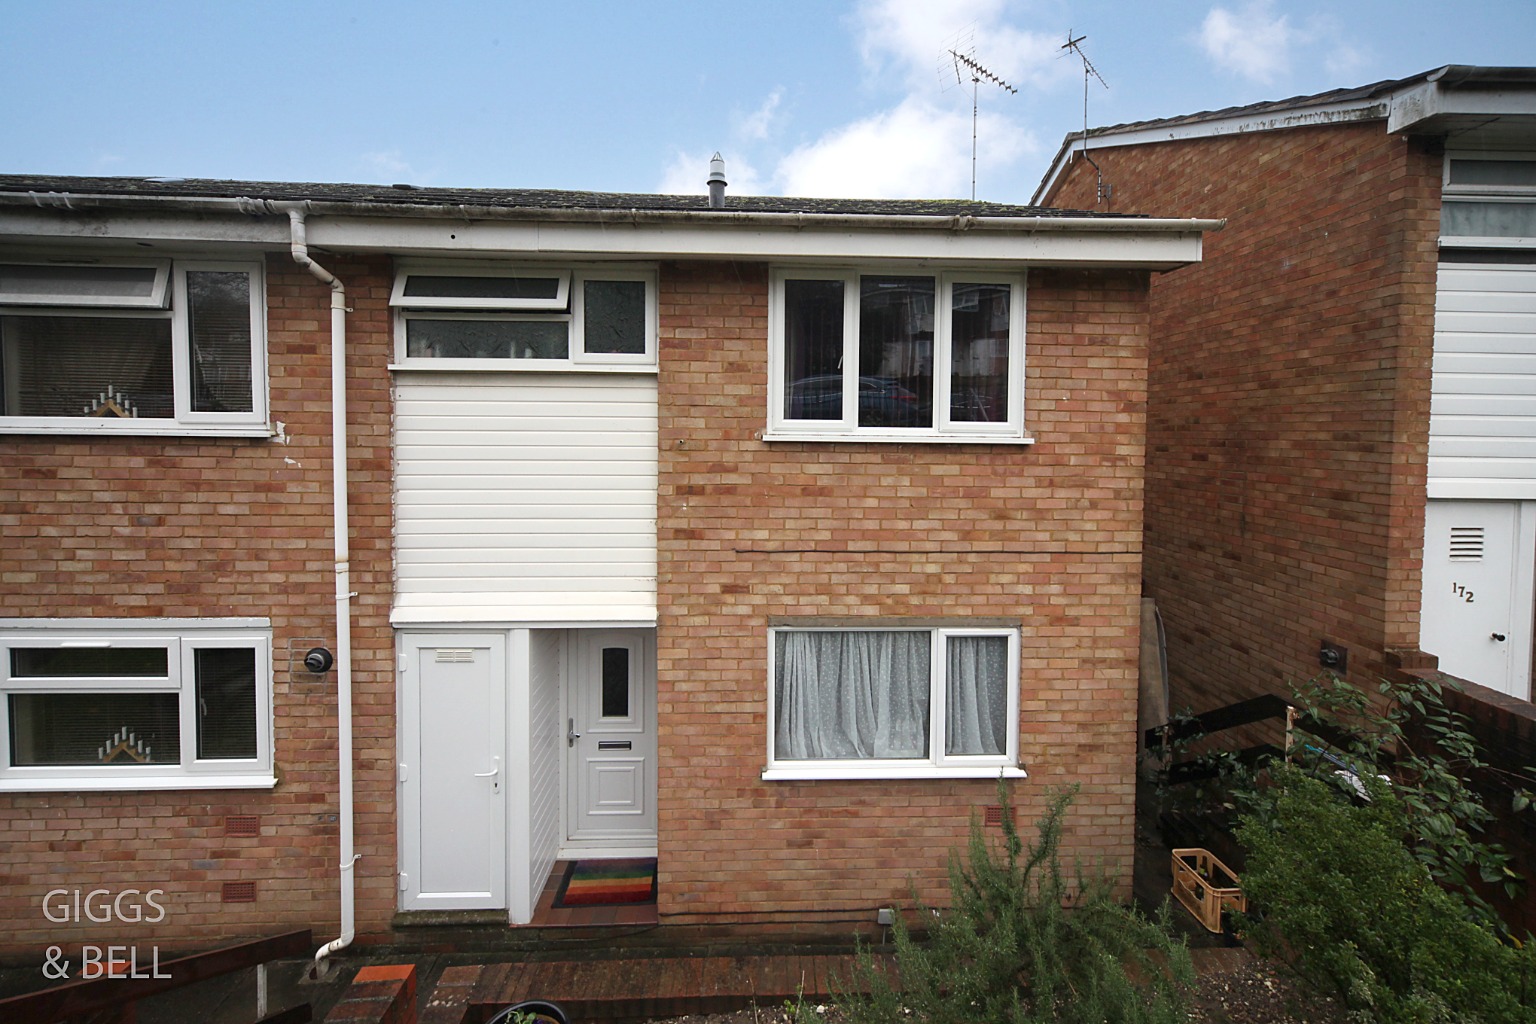 3 bed end of terrace house for sale in Devon Road, Luton, LU2 